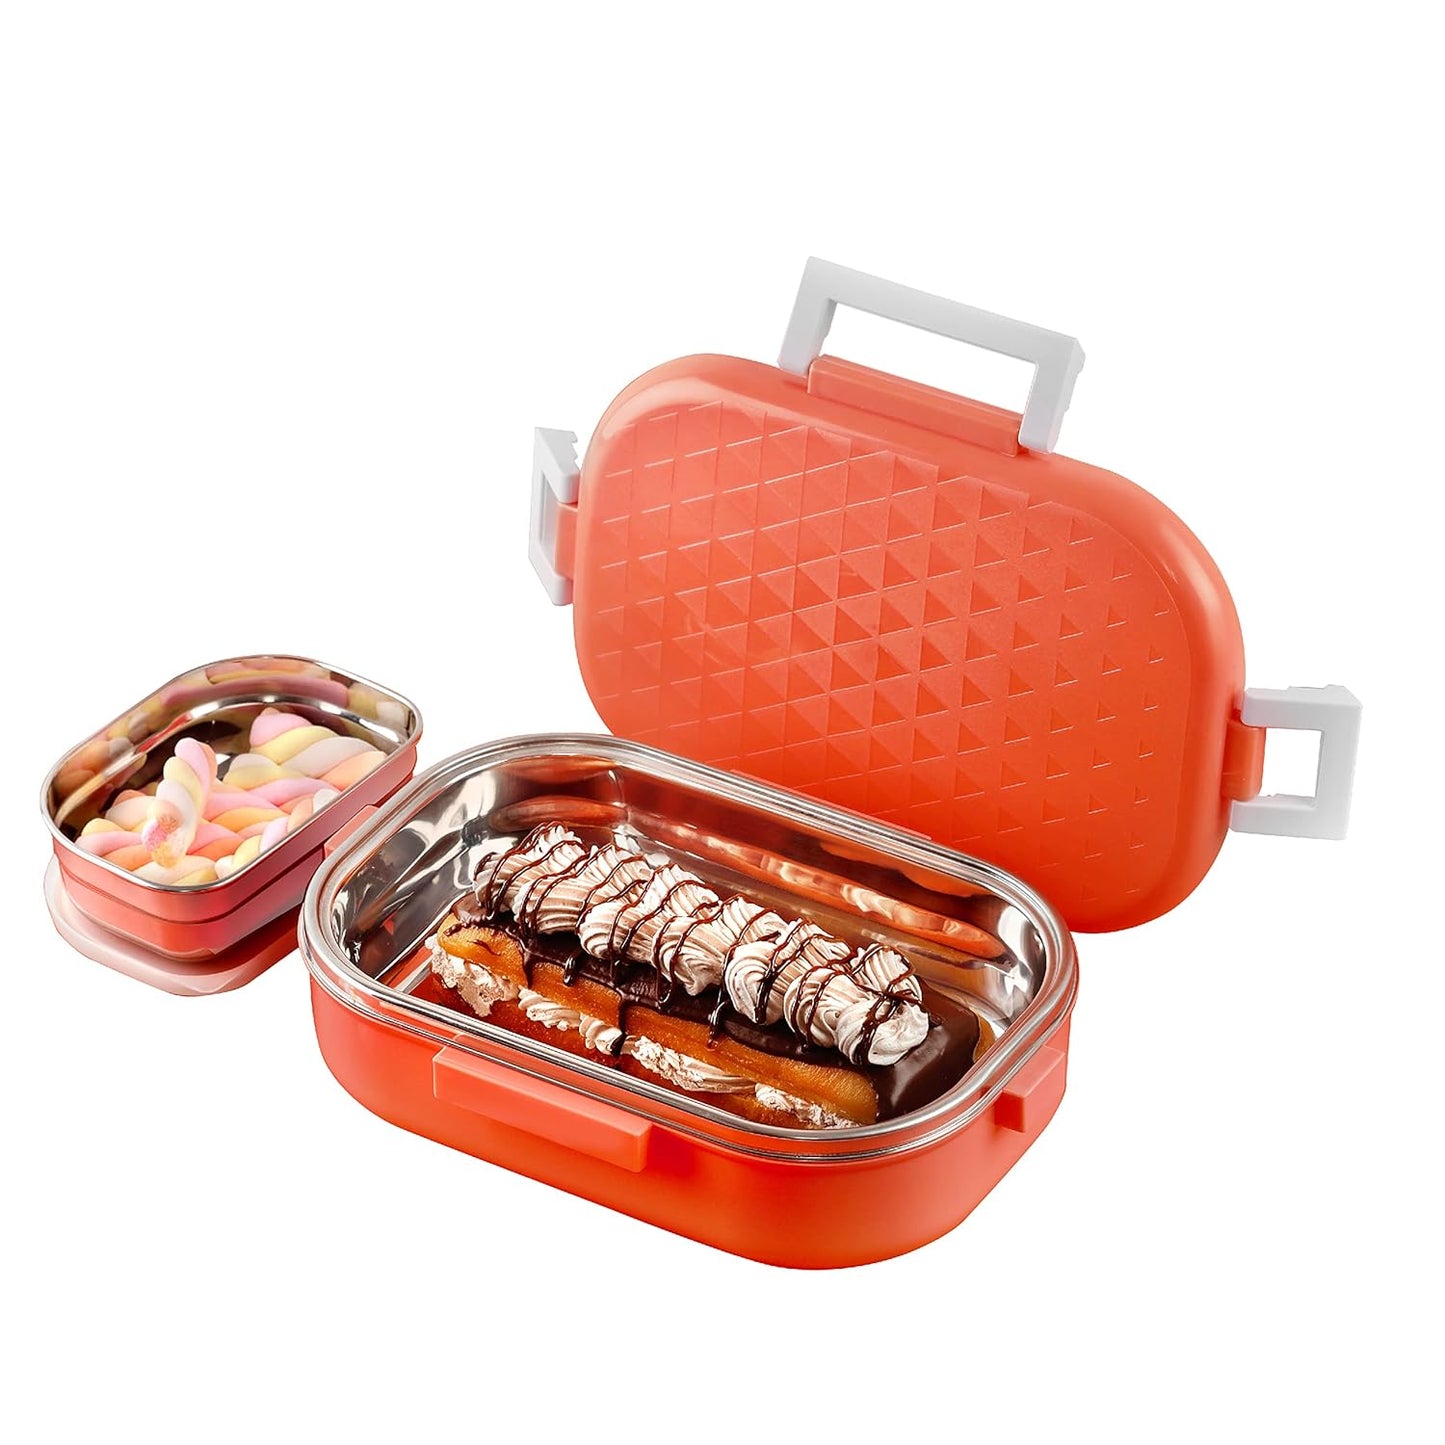 CELLO Altro Neo Lunch Box, Neo Orange, 700ml | 2 Units Insulated Lunch Boxes |Stainless Steel Lunch Box for Kids | Leak-Proof Snacks Tiffin Box for School